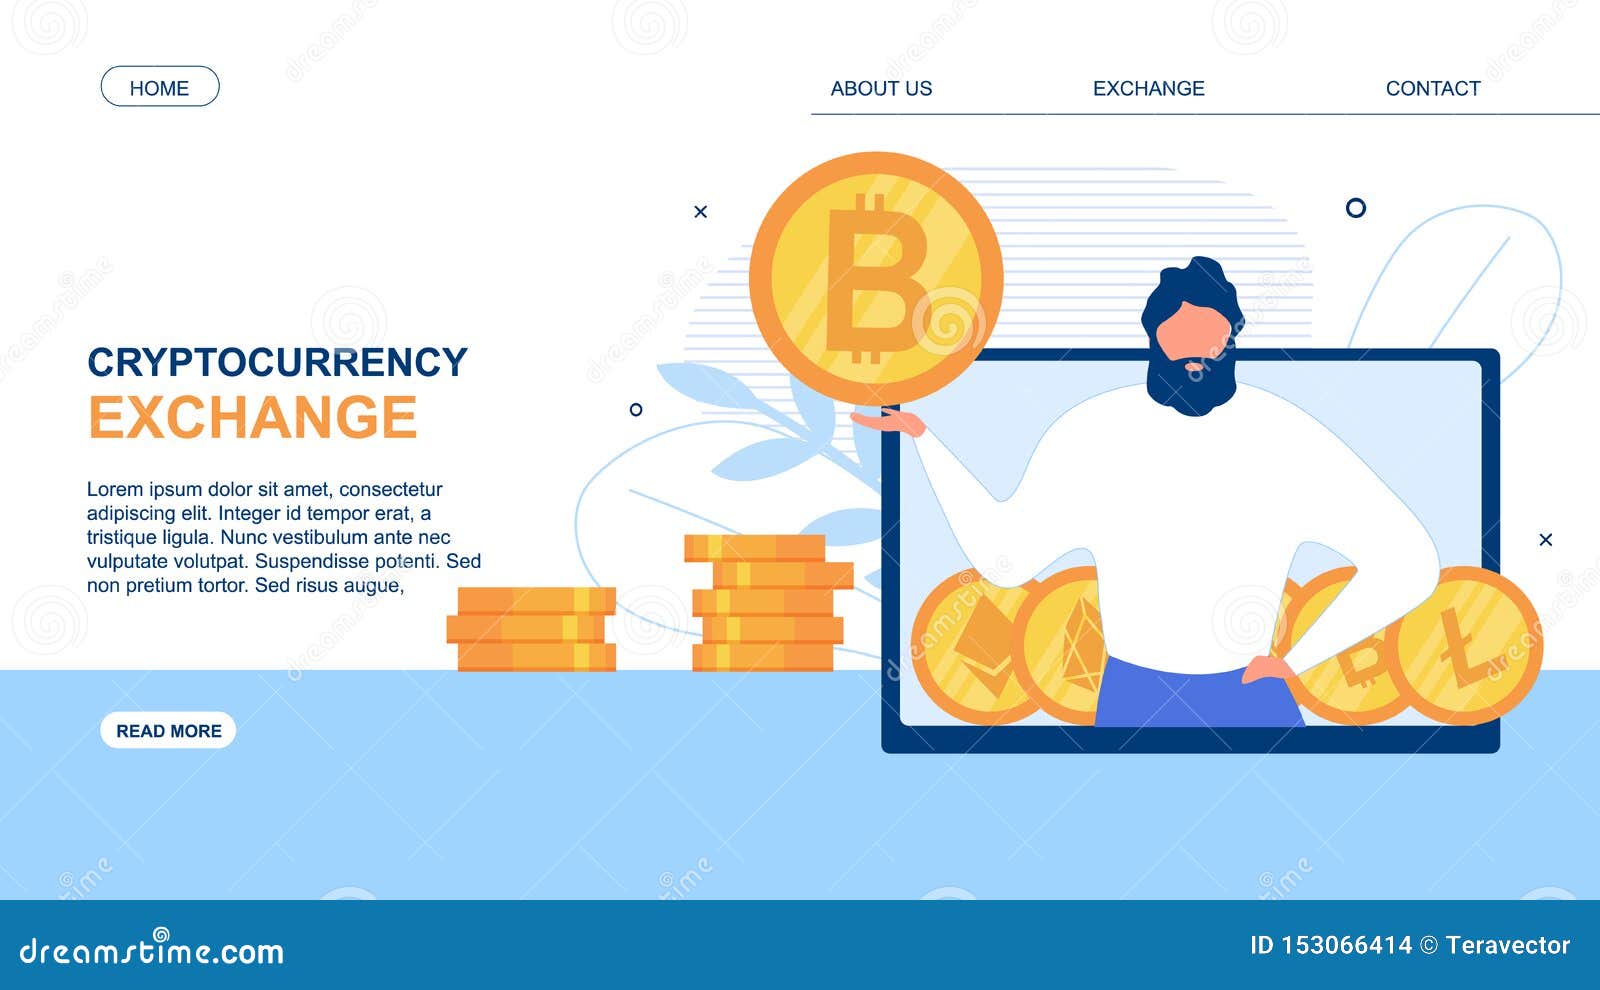 advertise bitcoin cryptocurrency business online